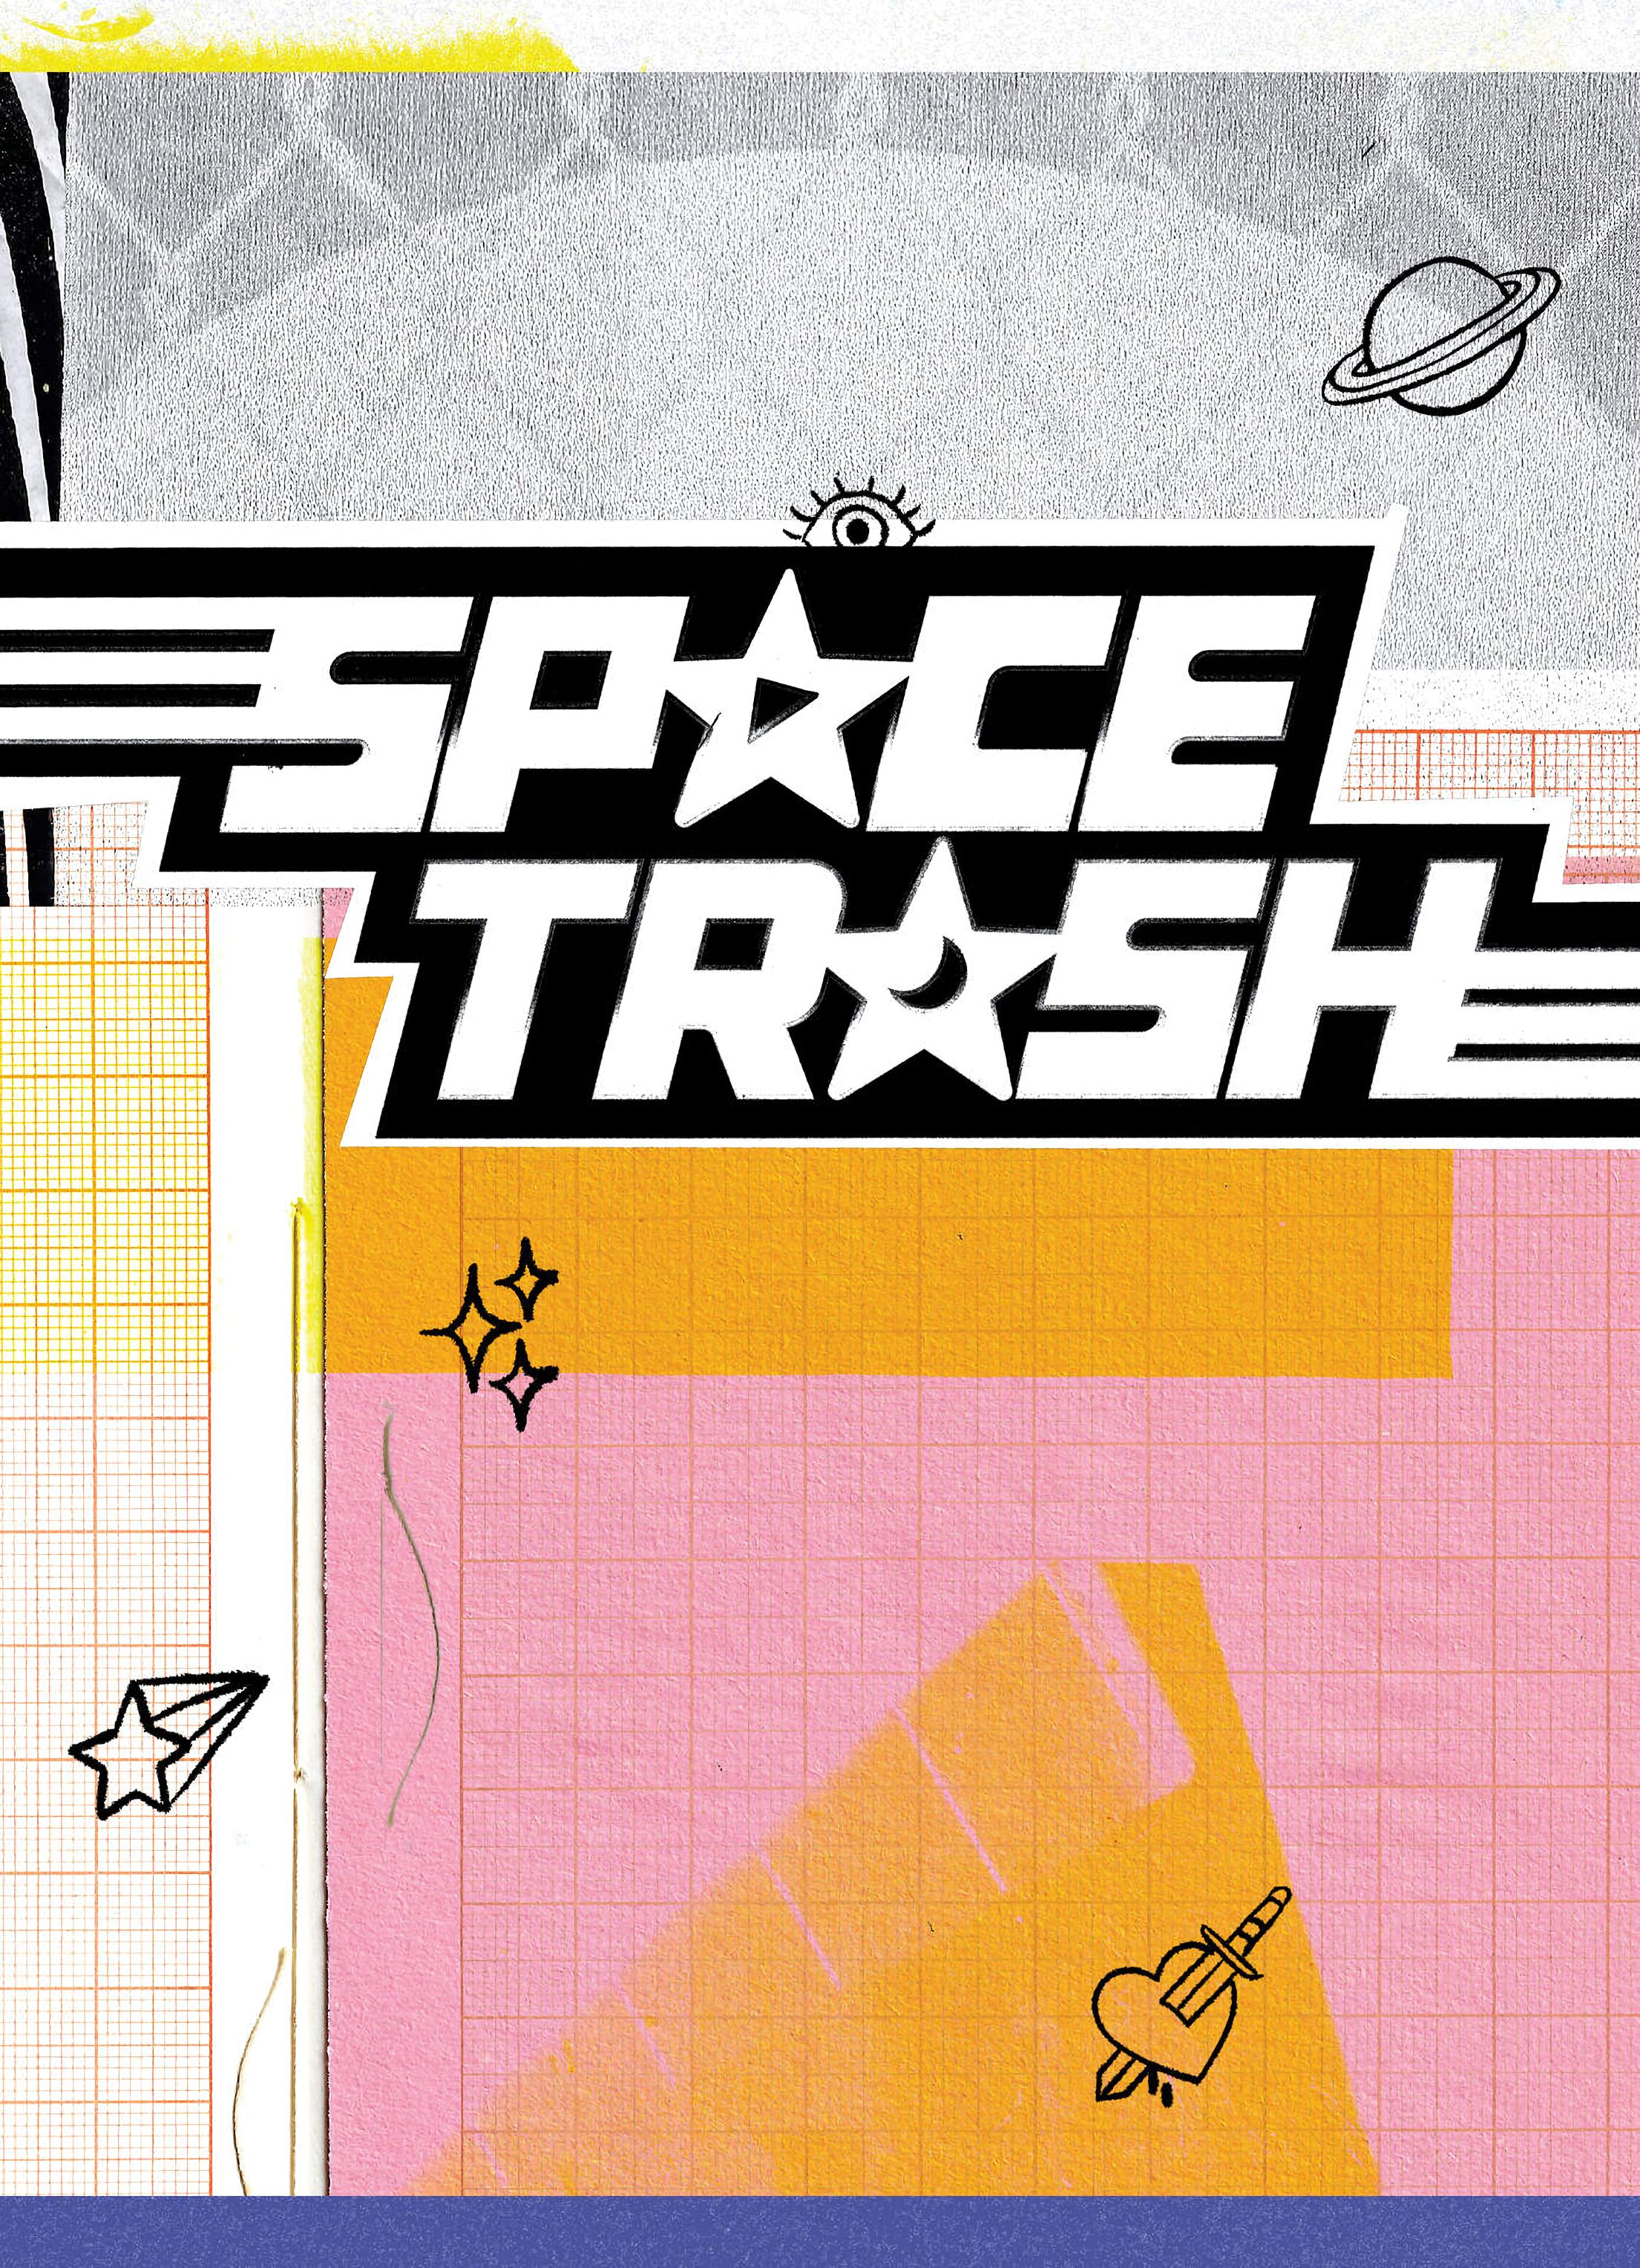 Read online Space Trash comic -  Issue # TPB - 3